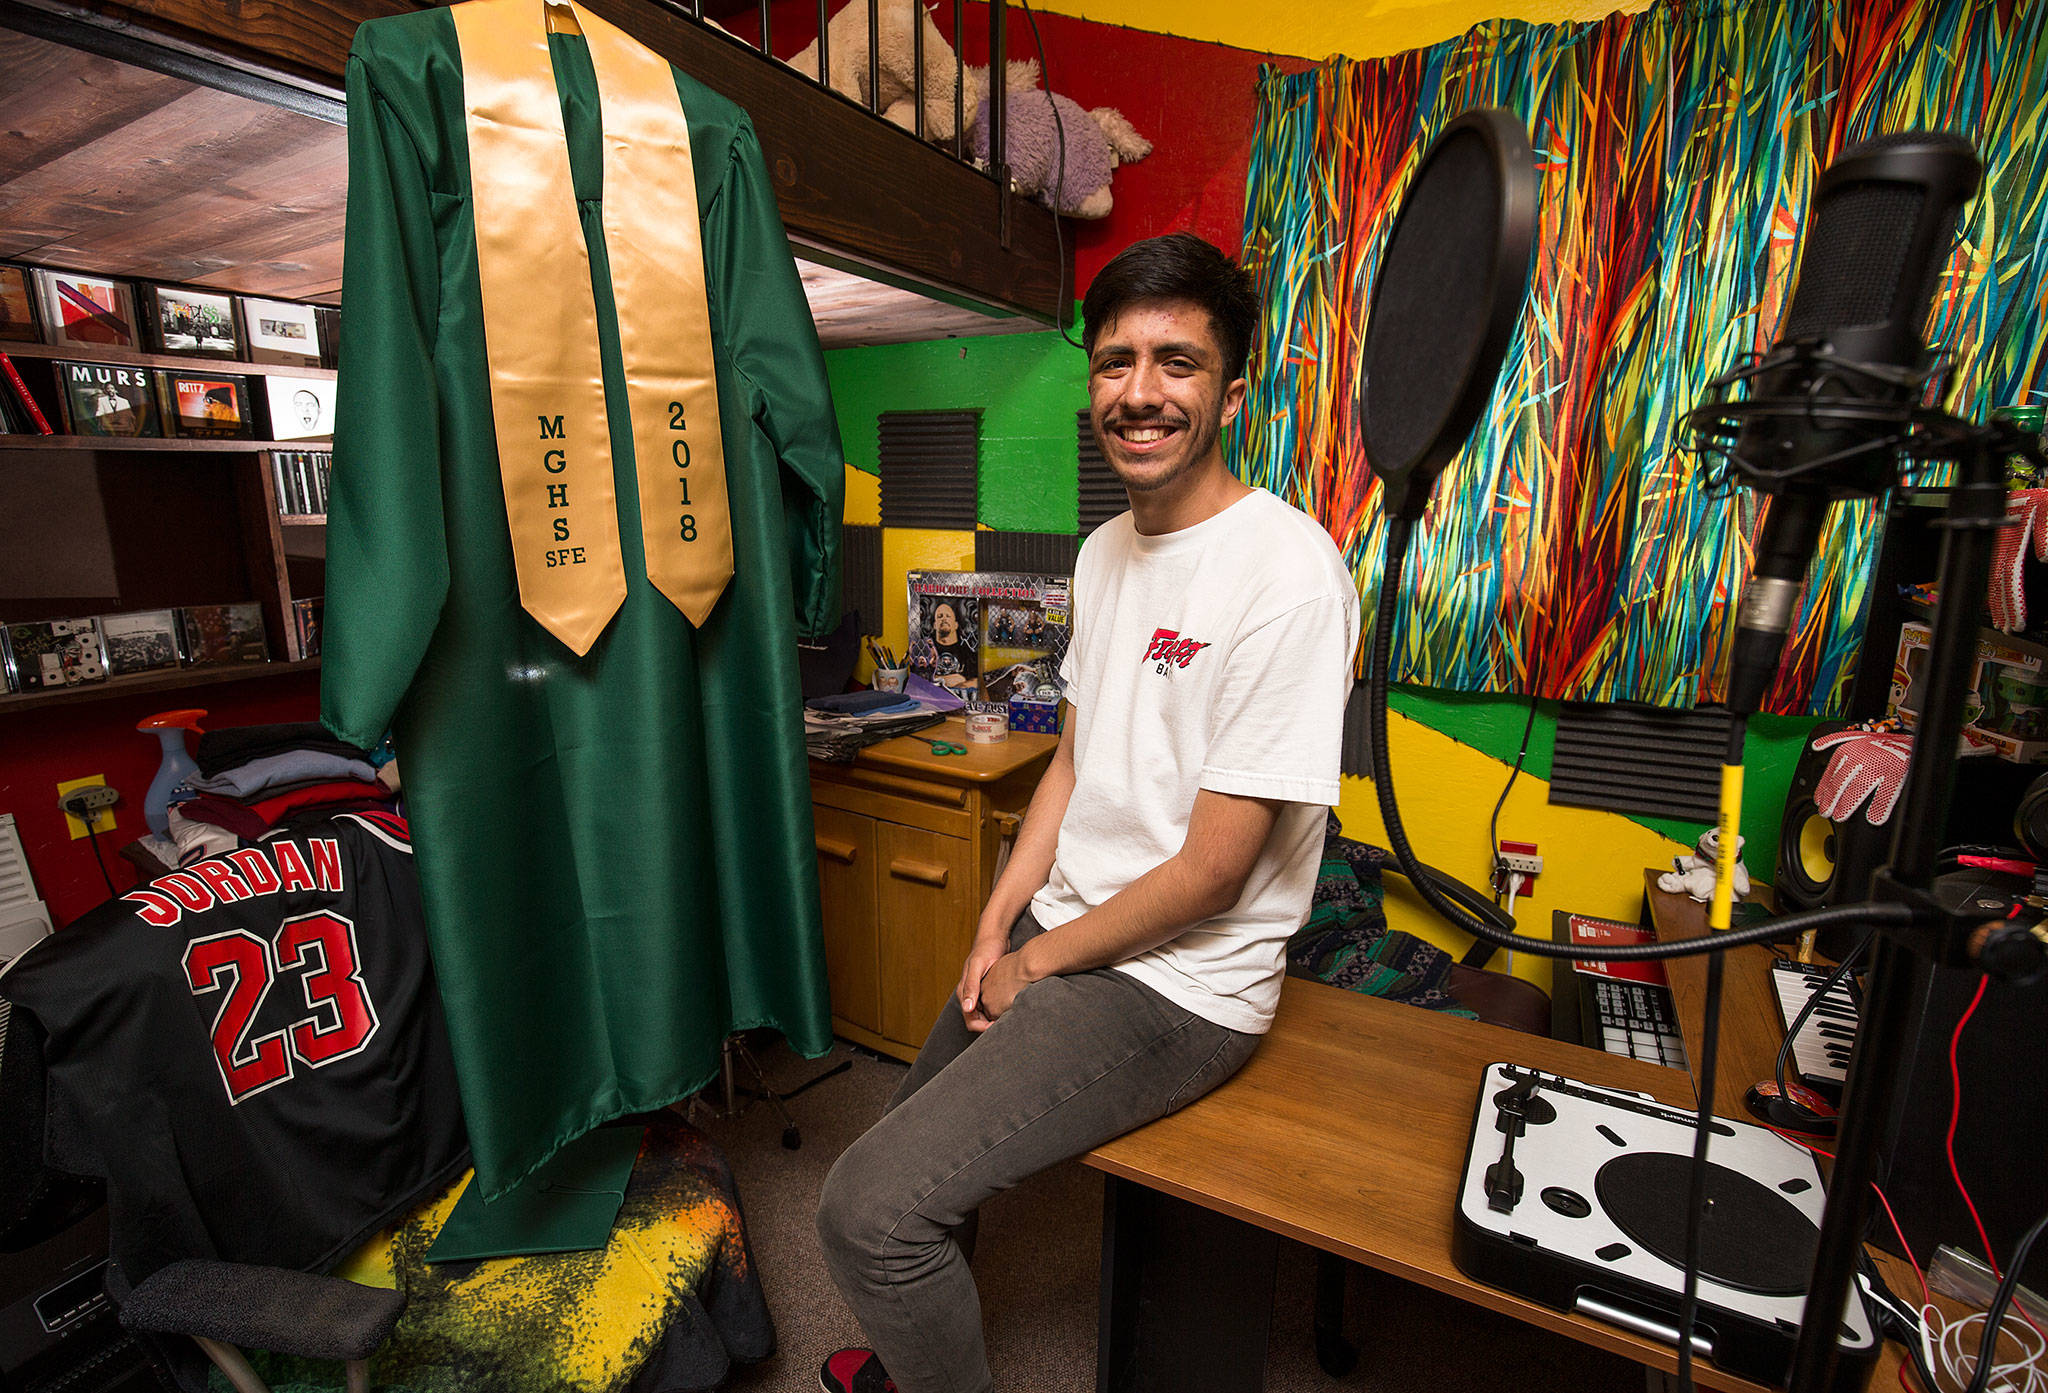 Daniel Garcia, aka the Y2Kid, the first baby born in Snohomish County at the dawning of a new millennium, in his room at home June 8 in Marysville surrounded by his hobbies, music, collections and thrift shop buys. Garcia graduates next week from Marysville Getchell High School and will attend Everett Community College in the fall. (Andy Bronson / The Herald)